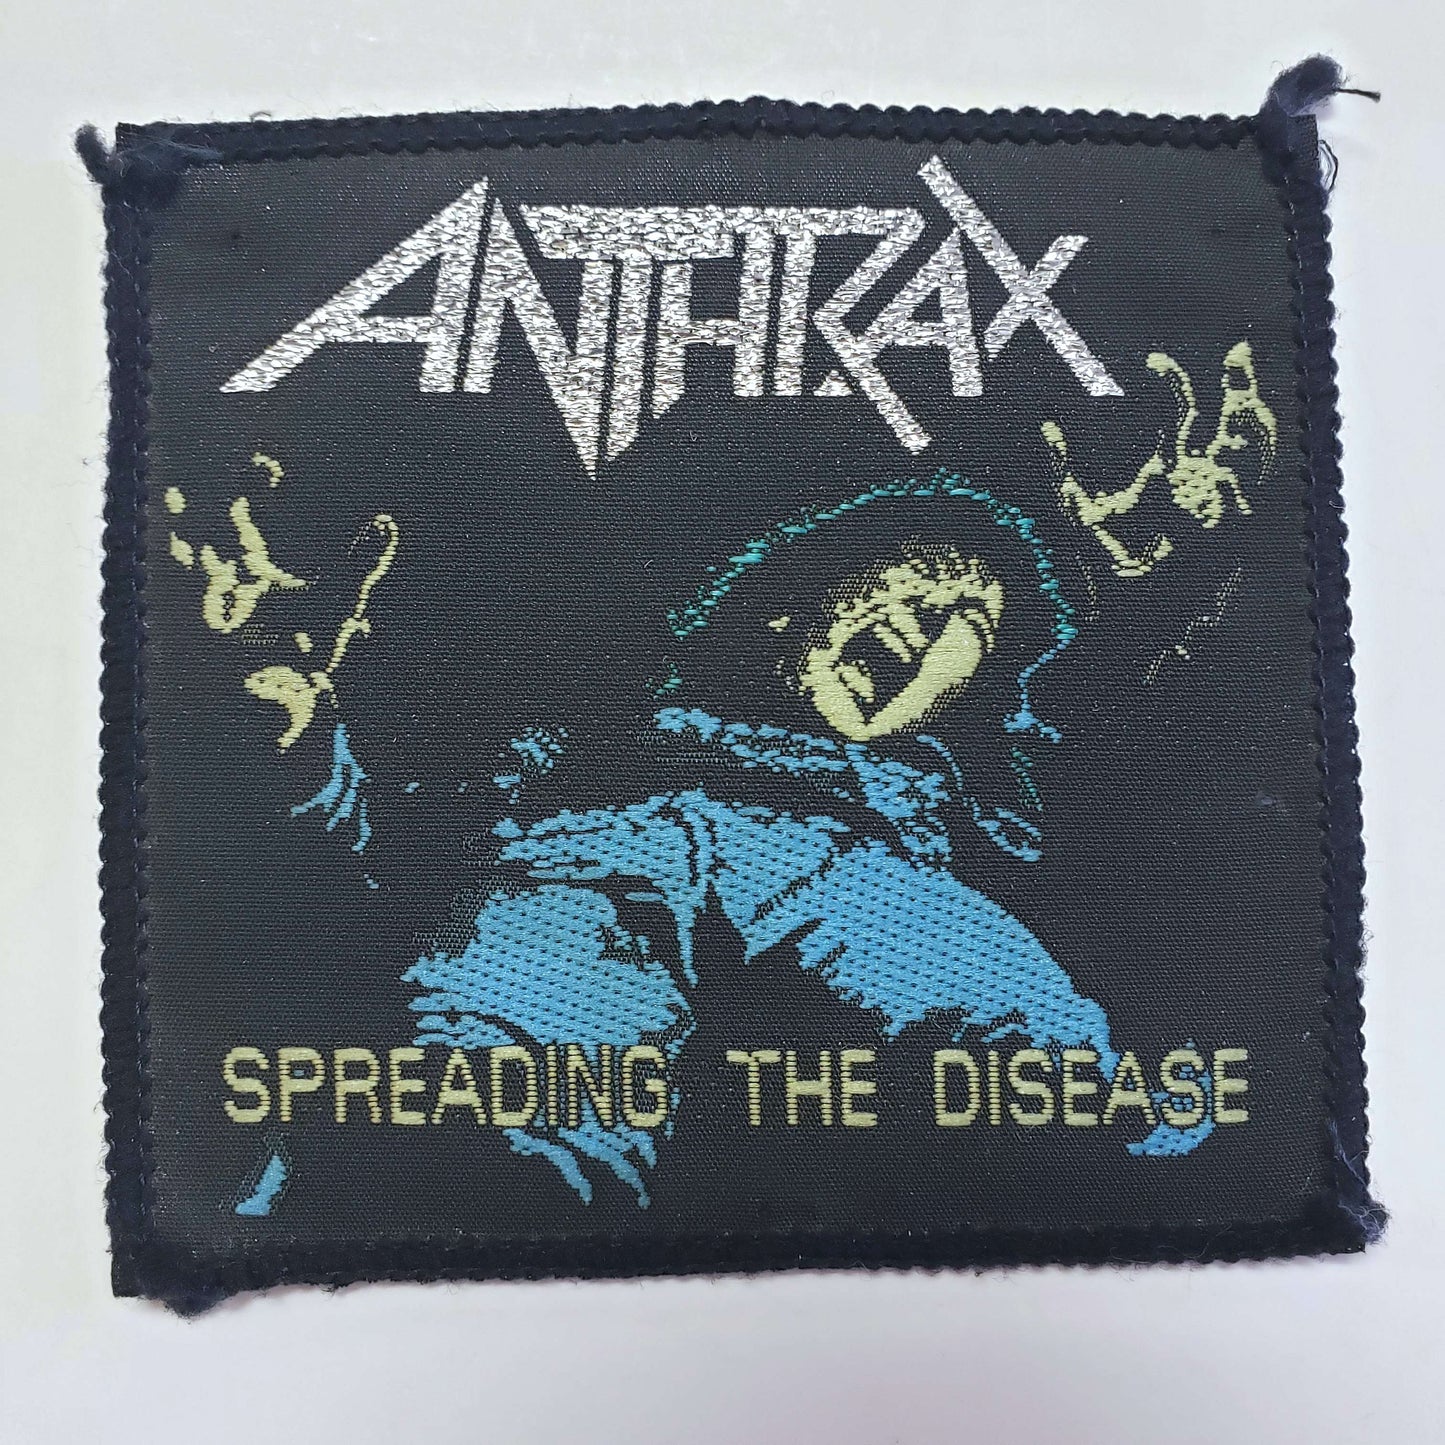 Anthrax - Spreading the Disease vintage patch